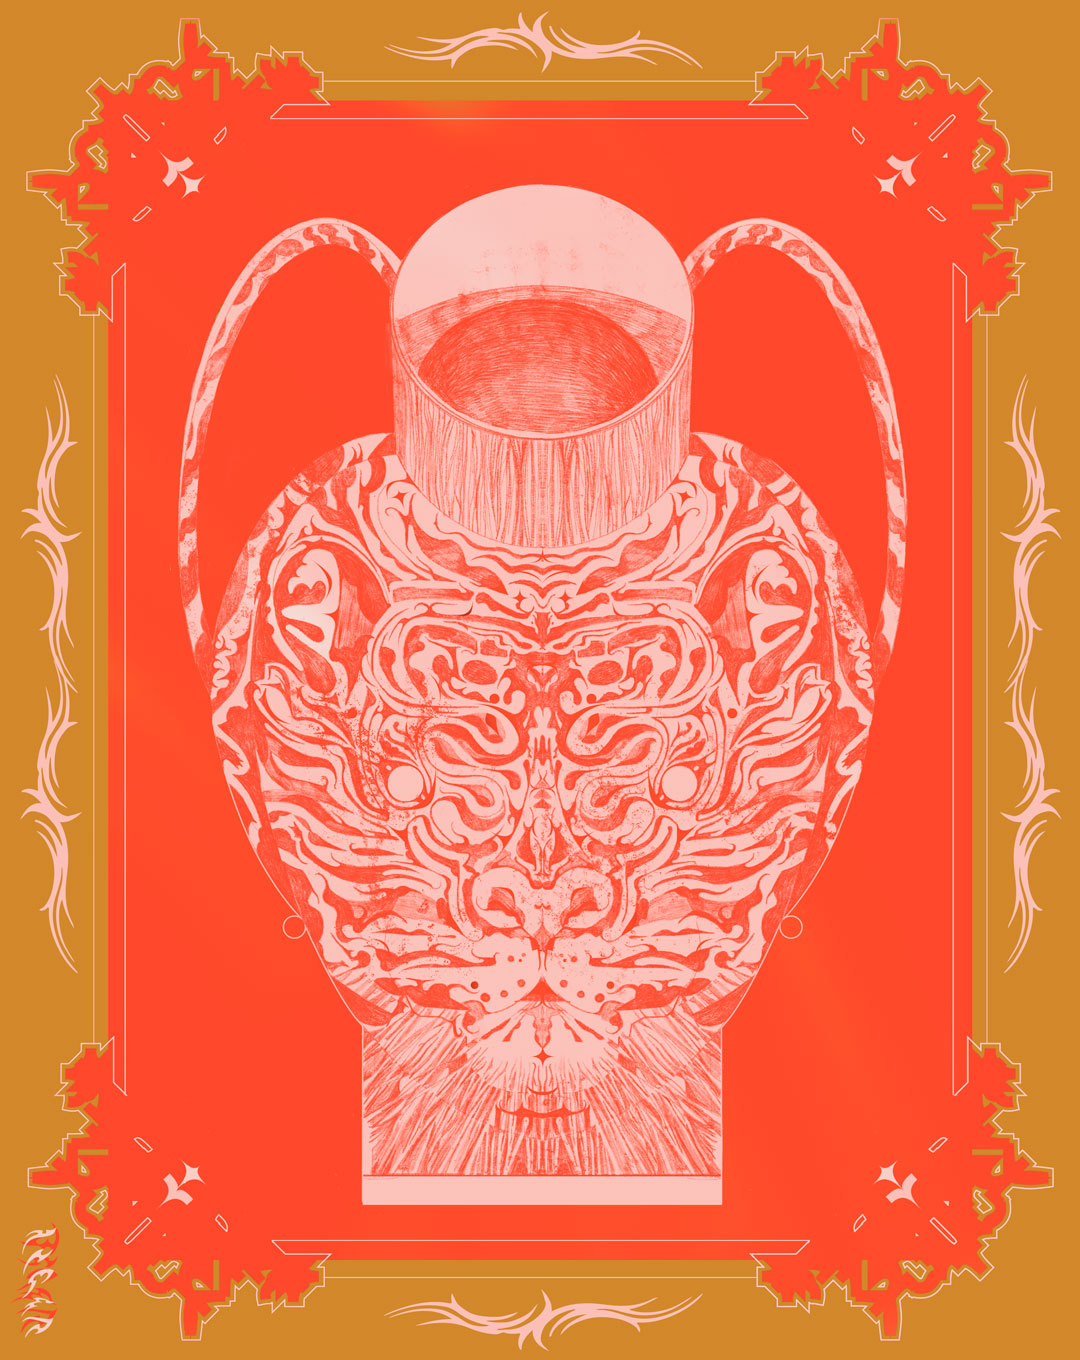 illustration of a vase with the face of a tiger on it